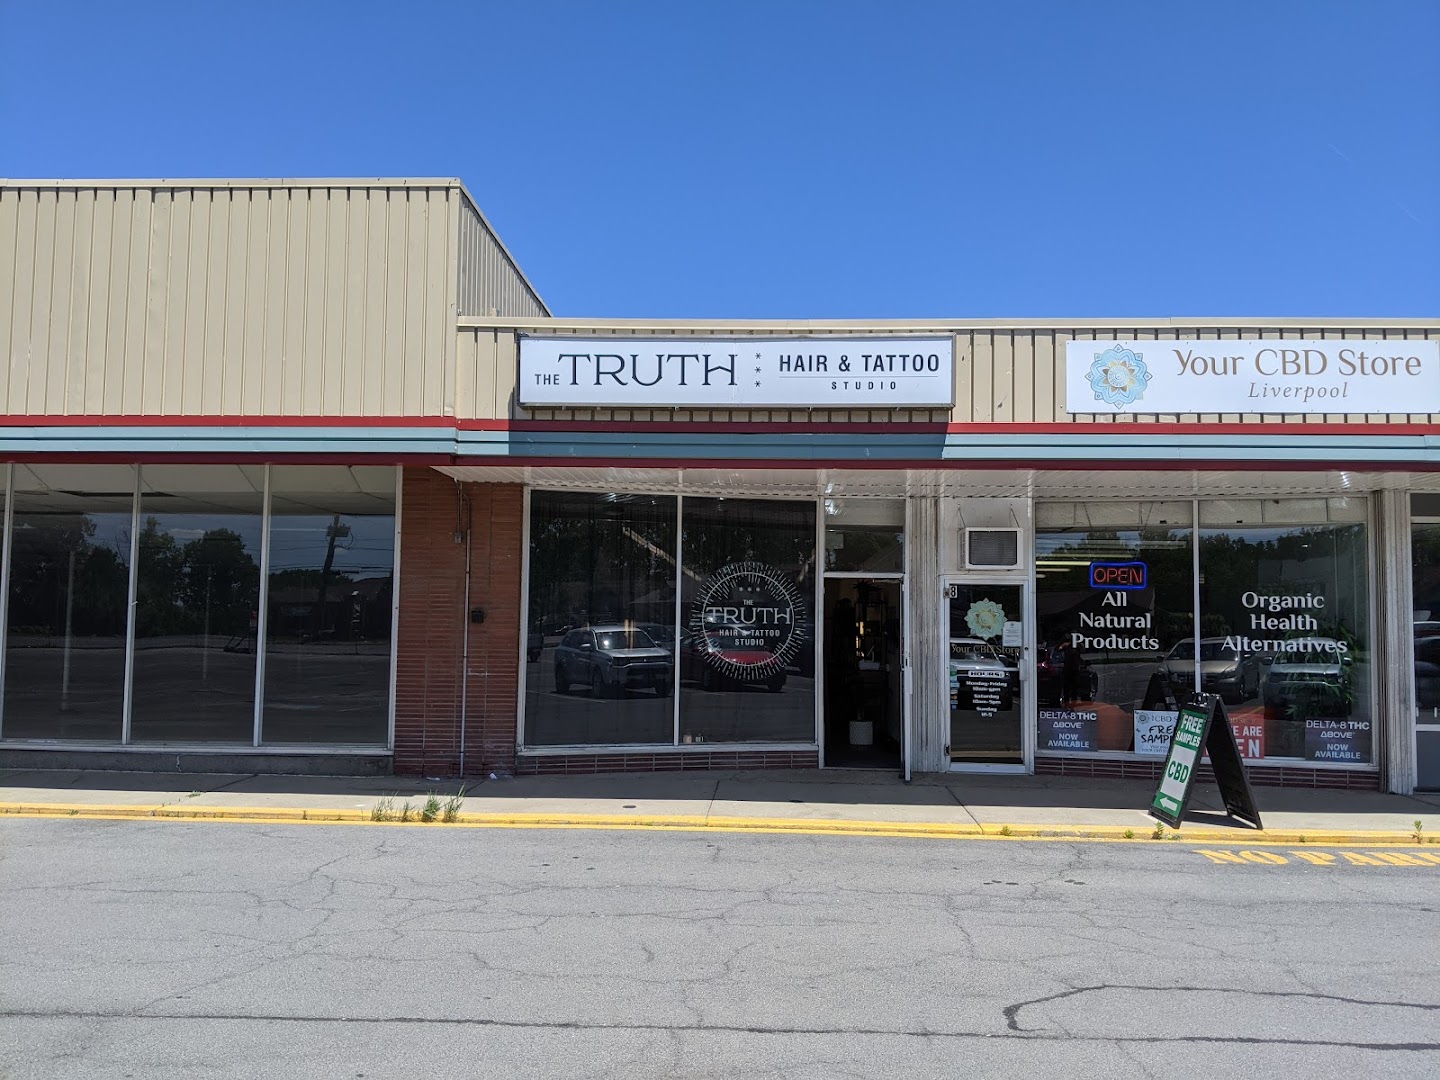 The TRUTH Hair and Tattoo Studio